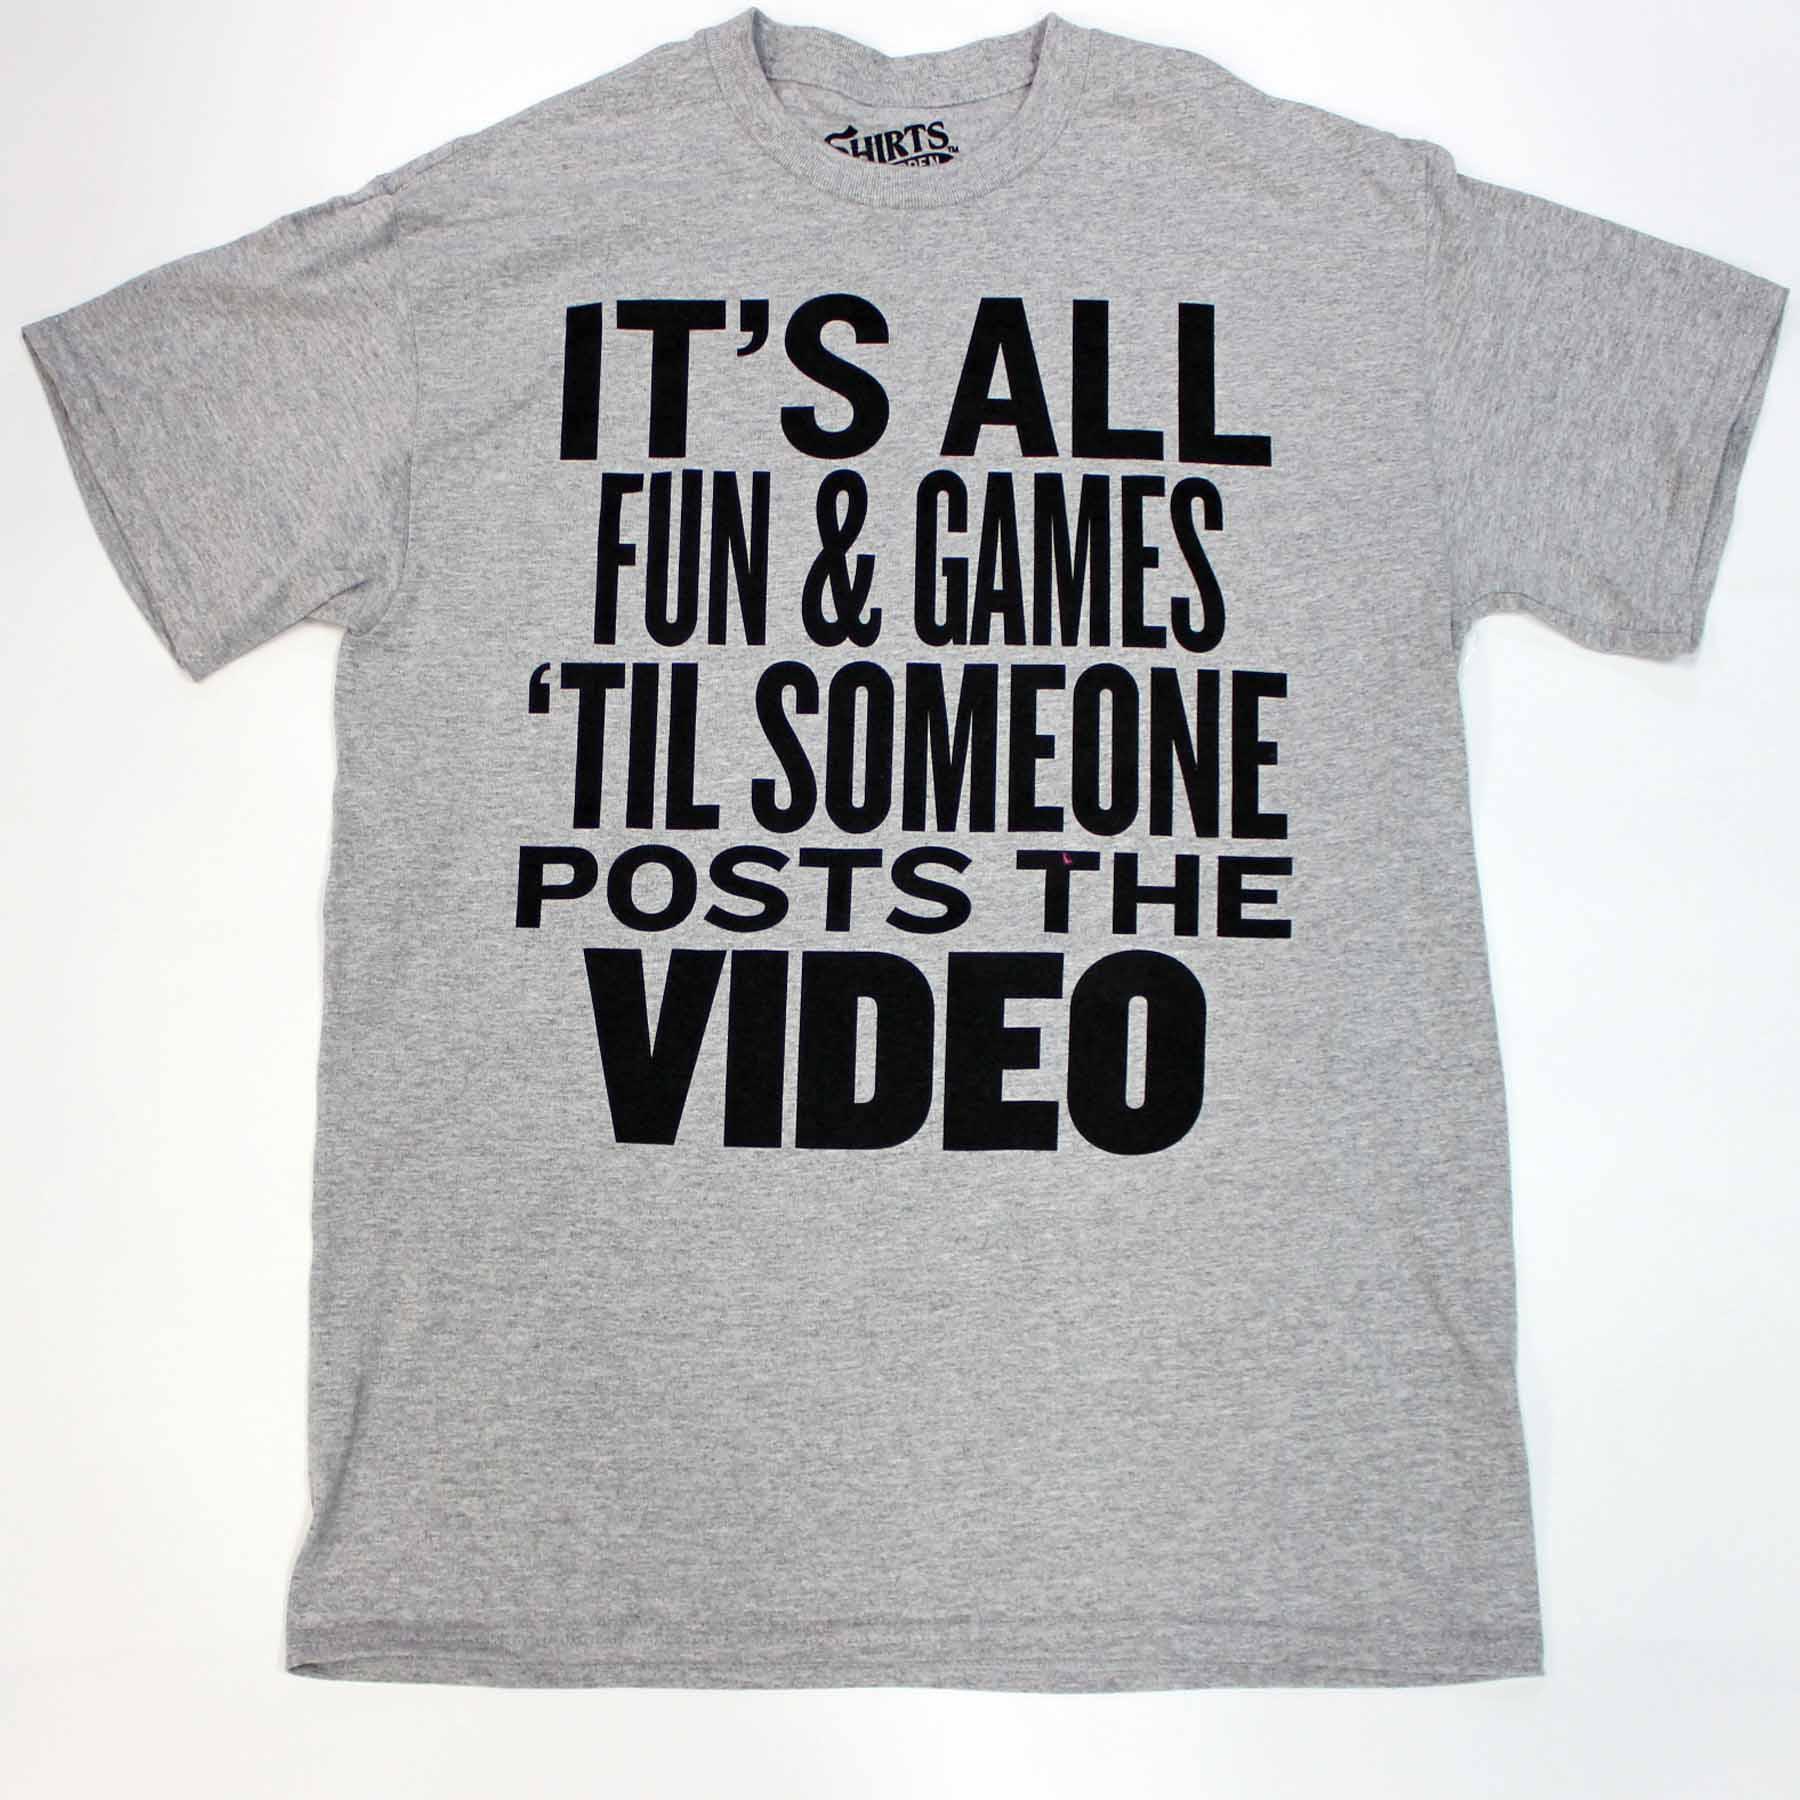 Jerry Leigh Men's Graphic T-Shirt - It's All Fun & Games